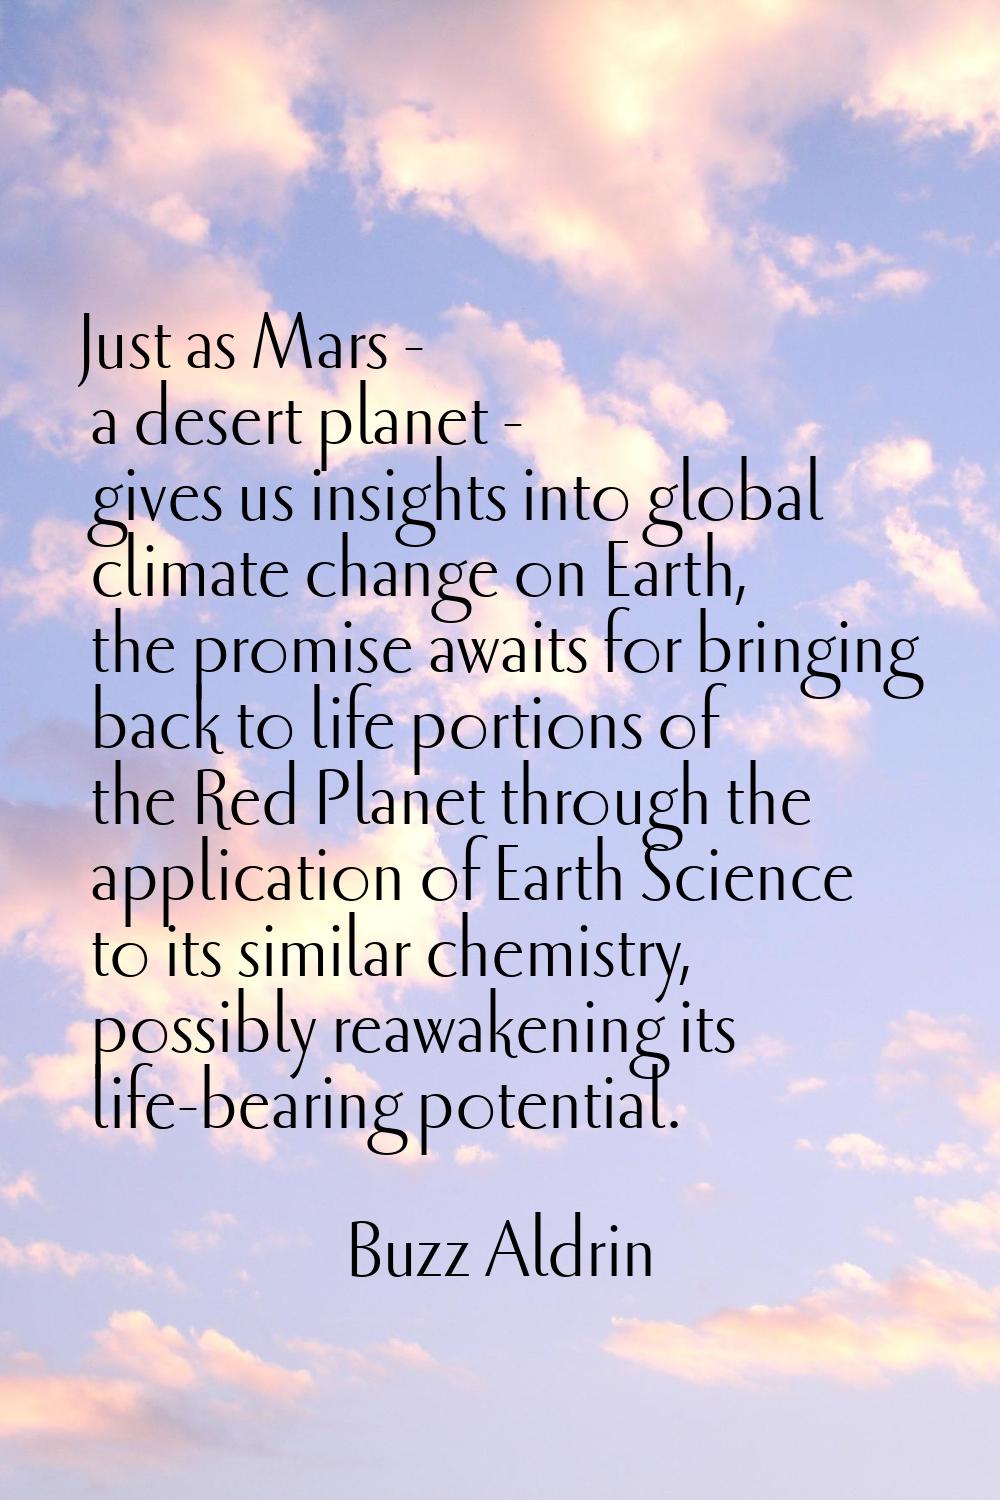 Just as Mars - a desert planet - gives us insights into global climate change on Earth, the promise